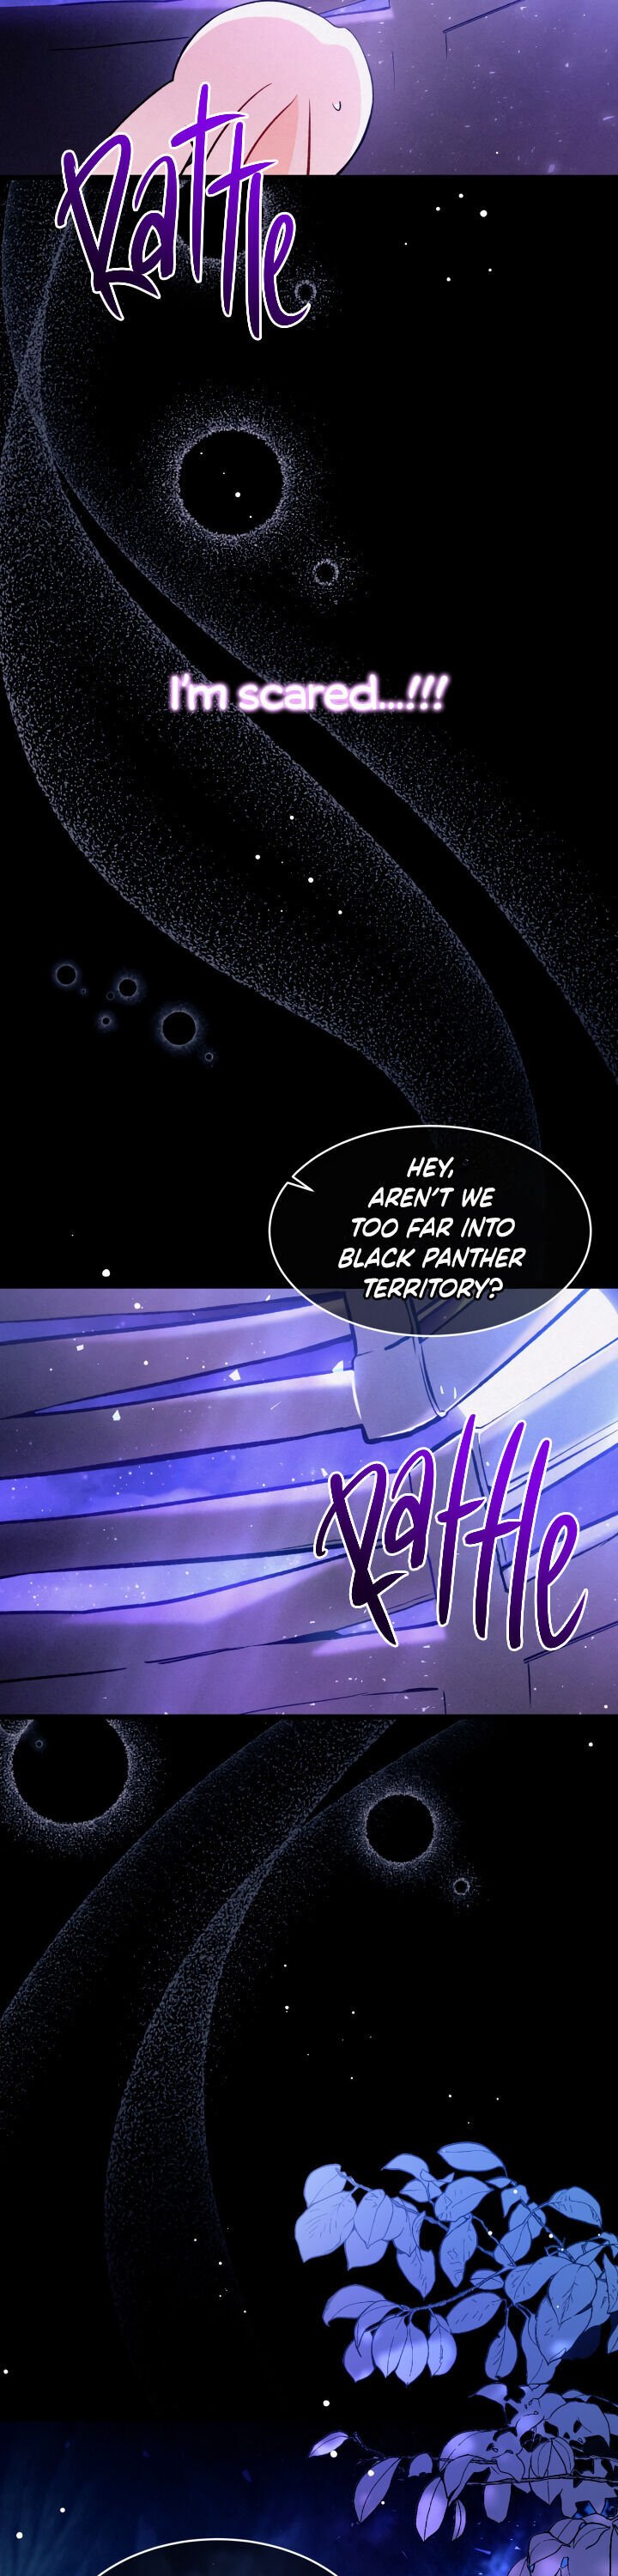 the-symbiotic-relationship-between-a-rabbit-and-a-black-panther-chap-39-7